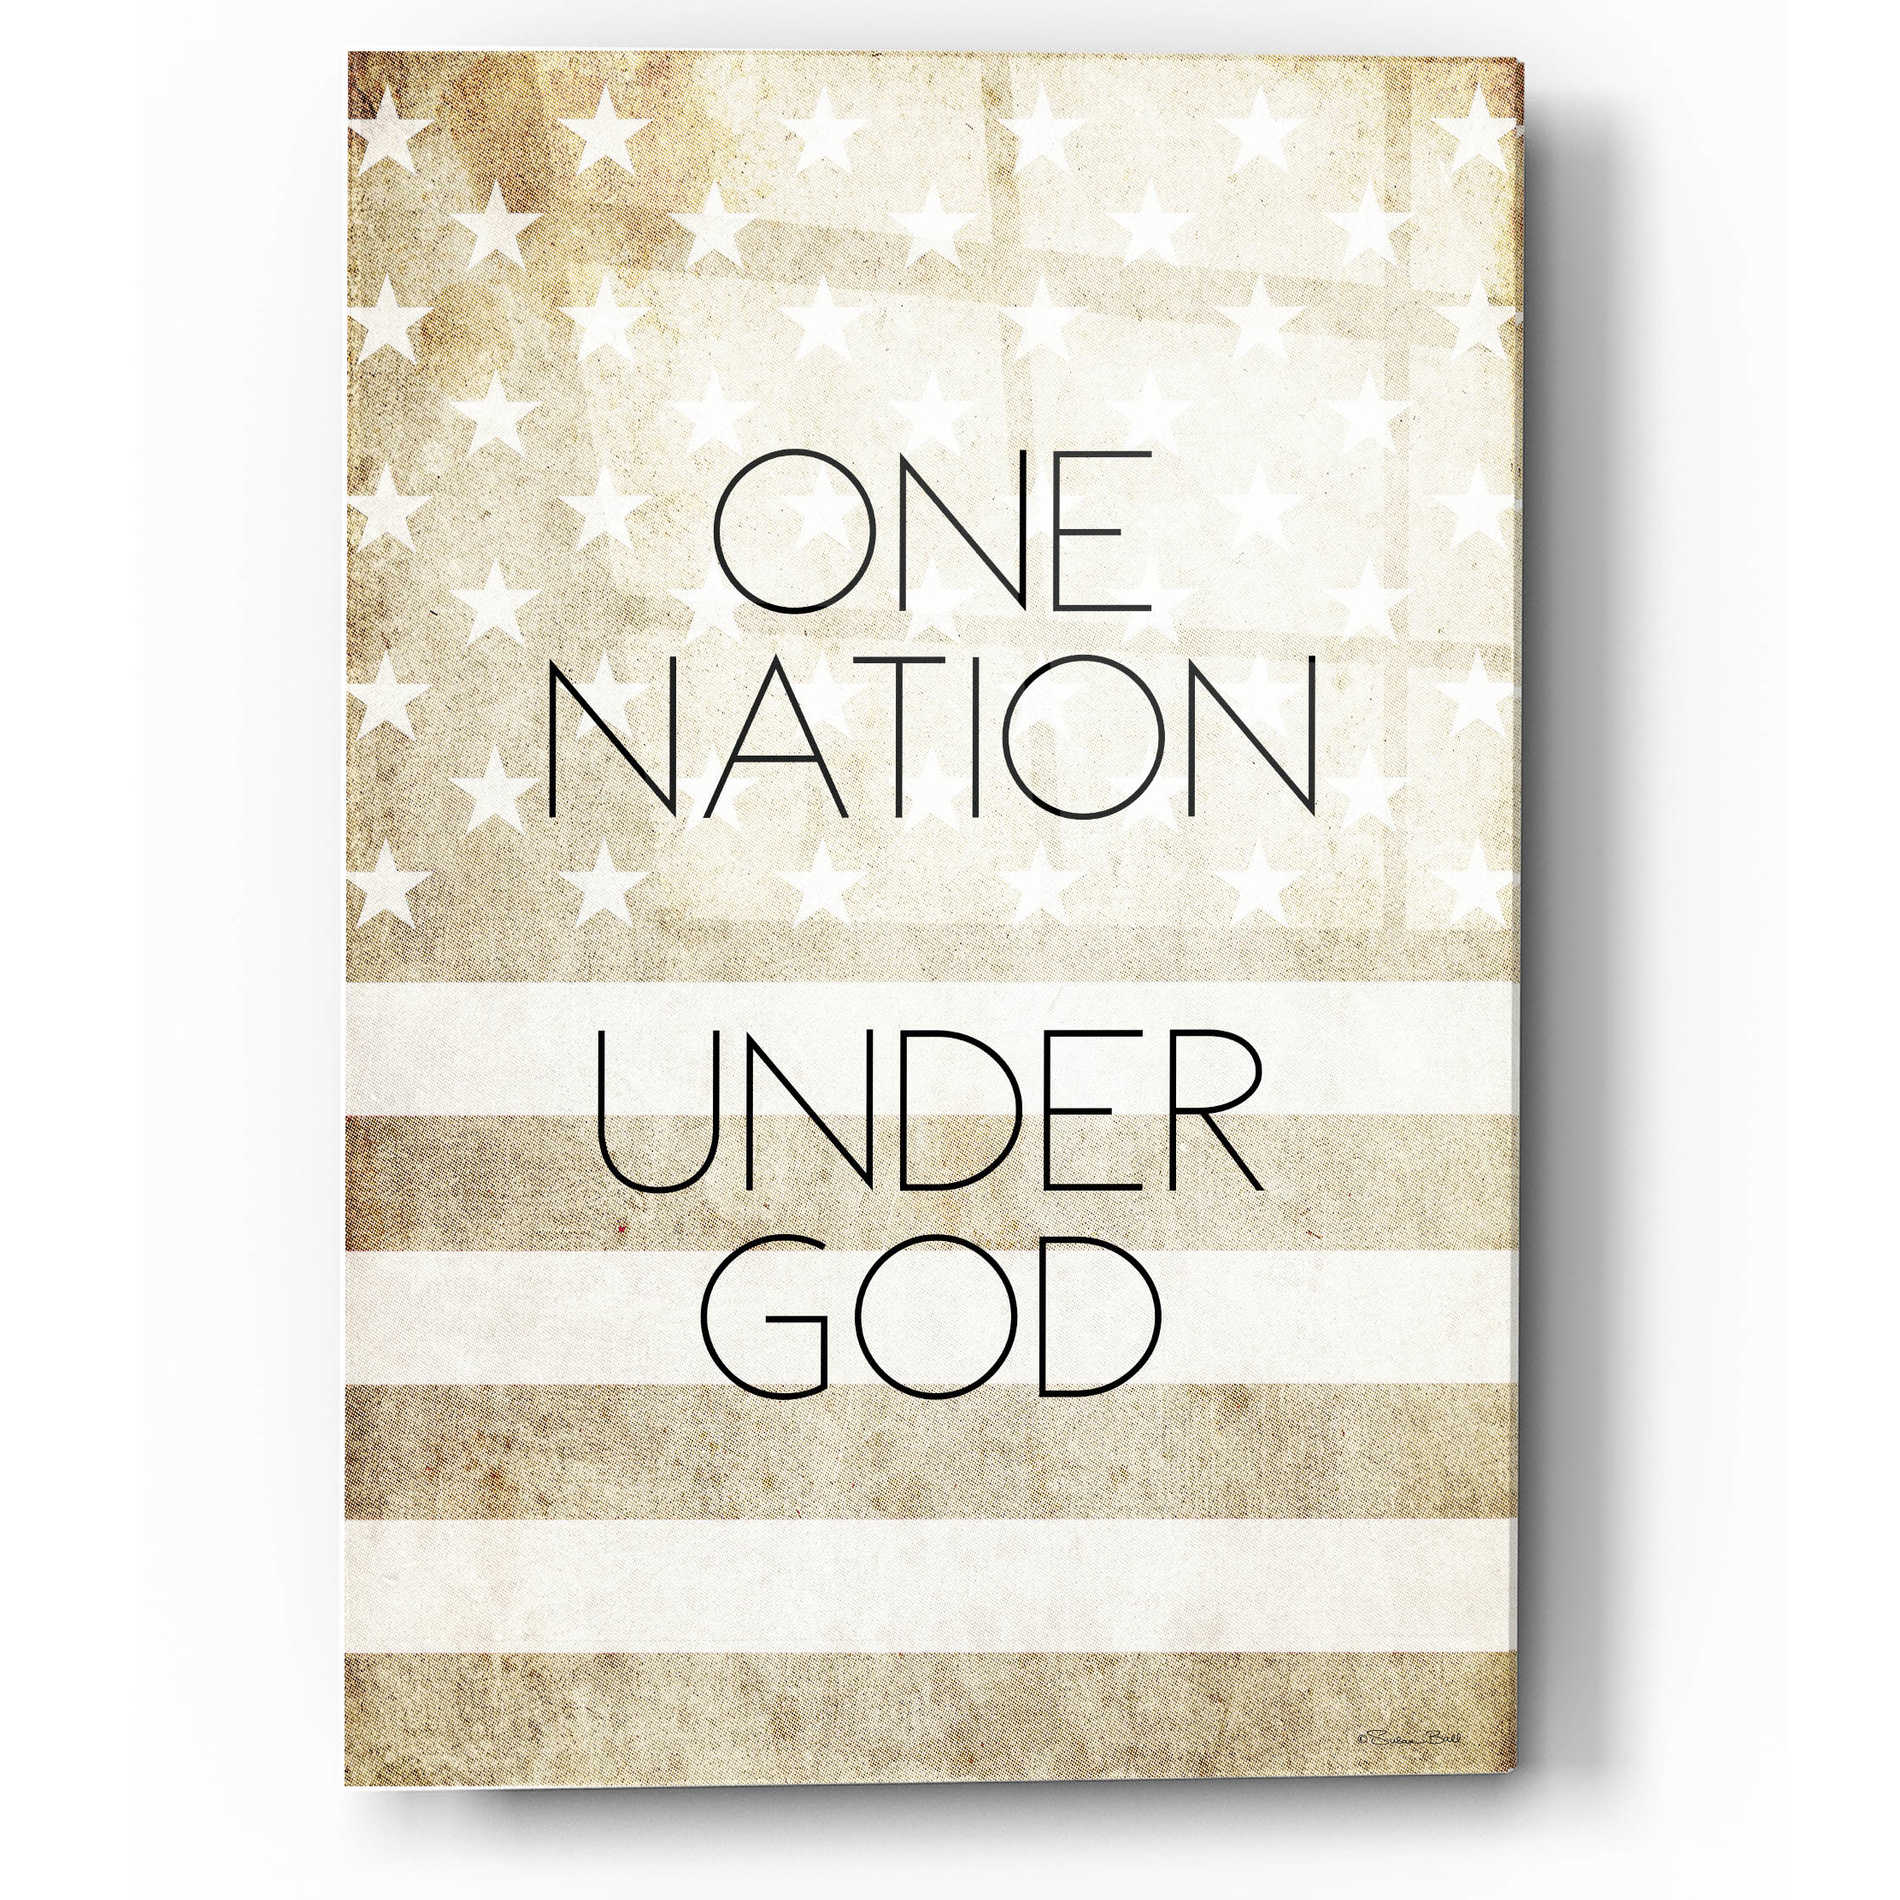 Epic Art 'One Nation Under God' by Susan Ball, Acrylic Glass Wall Art,12x16